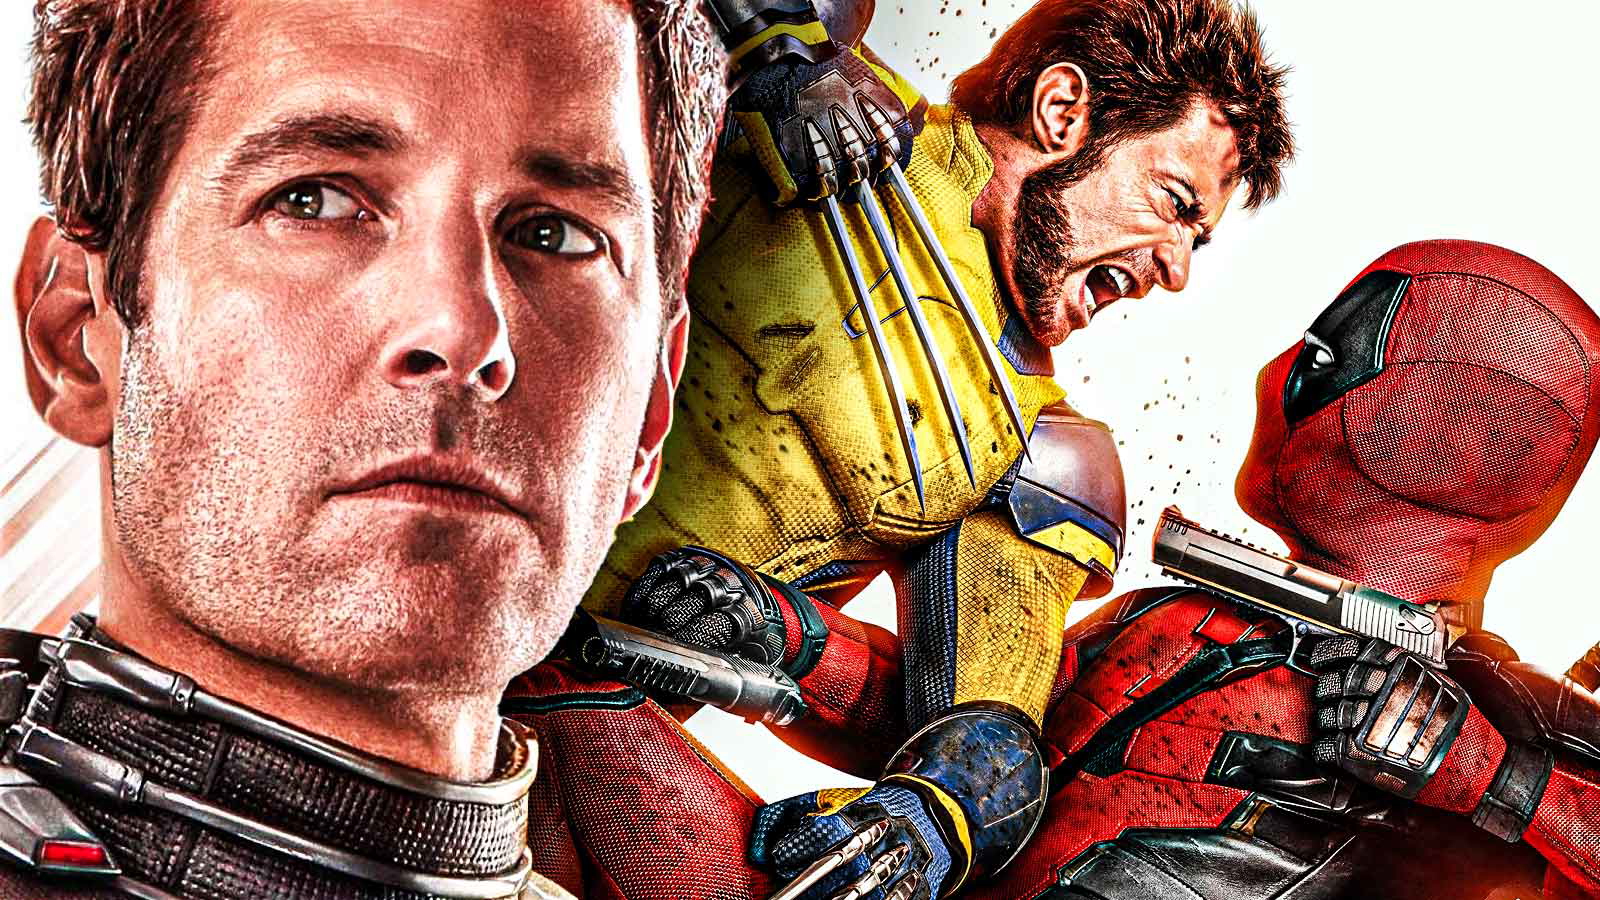 “Every callback is Paul Rudd”: Deadpool & Wolverine’s Meta Paul Rudd Joke May Have Its Roots in Director Shawn Levy’s Failed Acting Career – Here’s Why